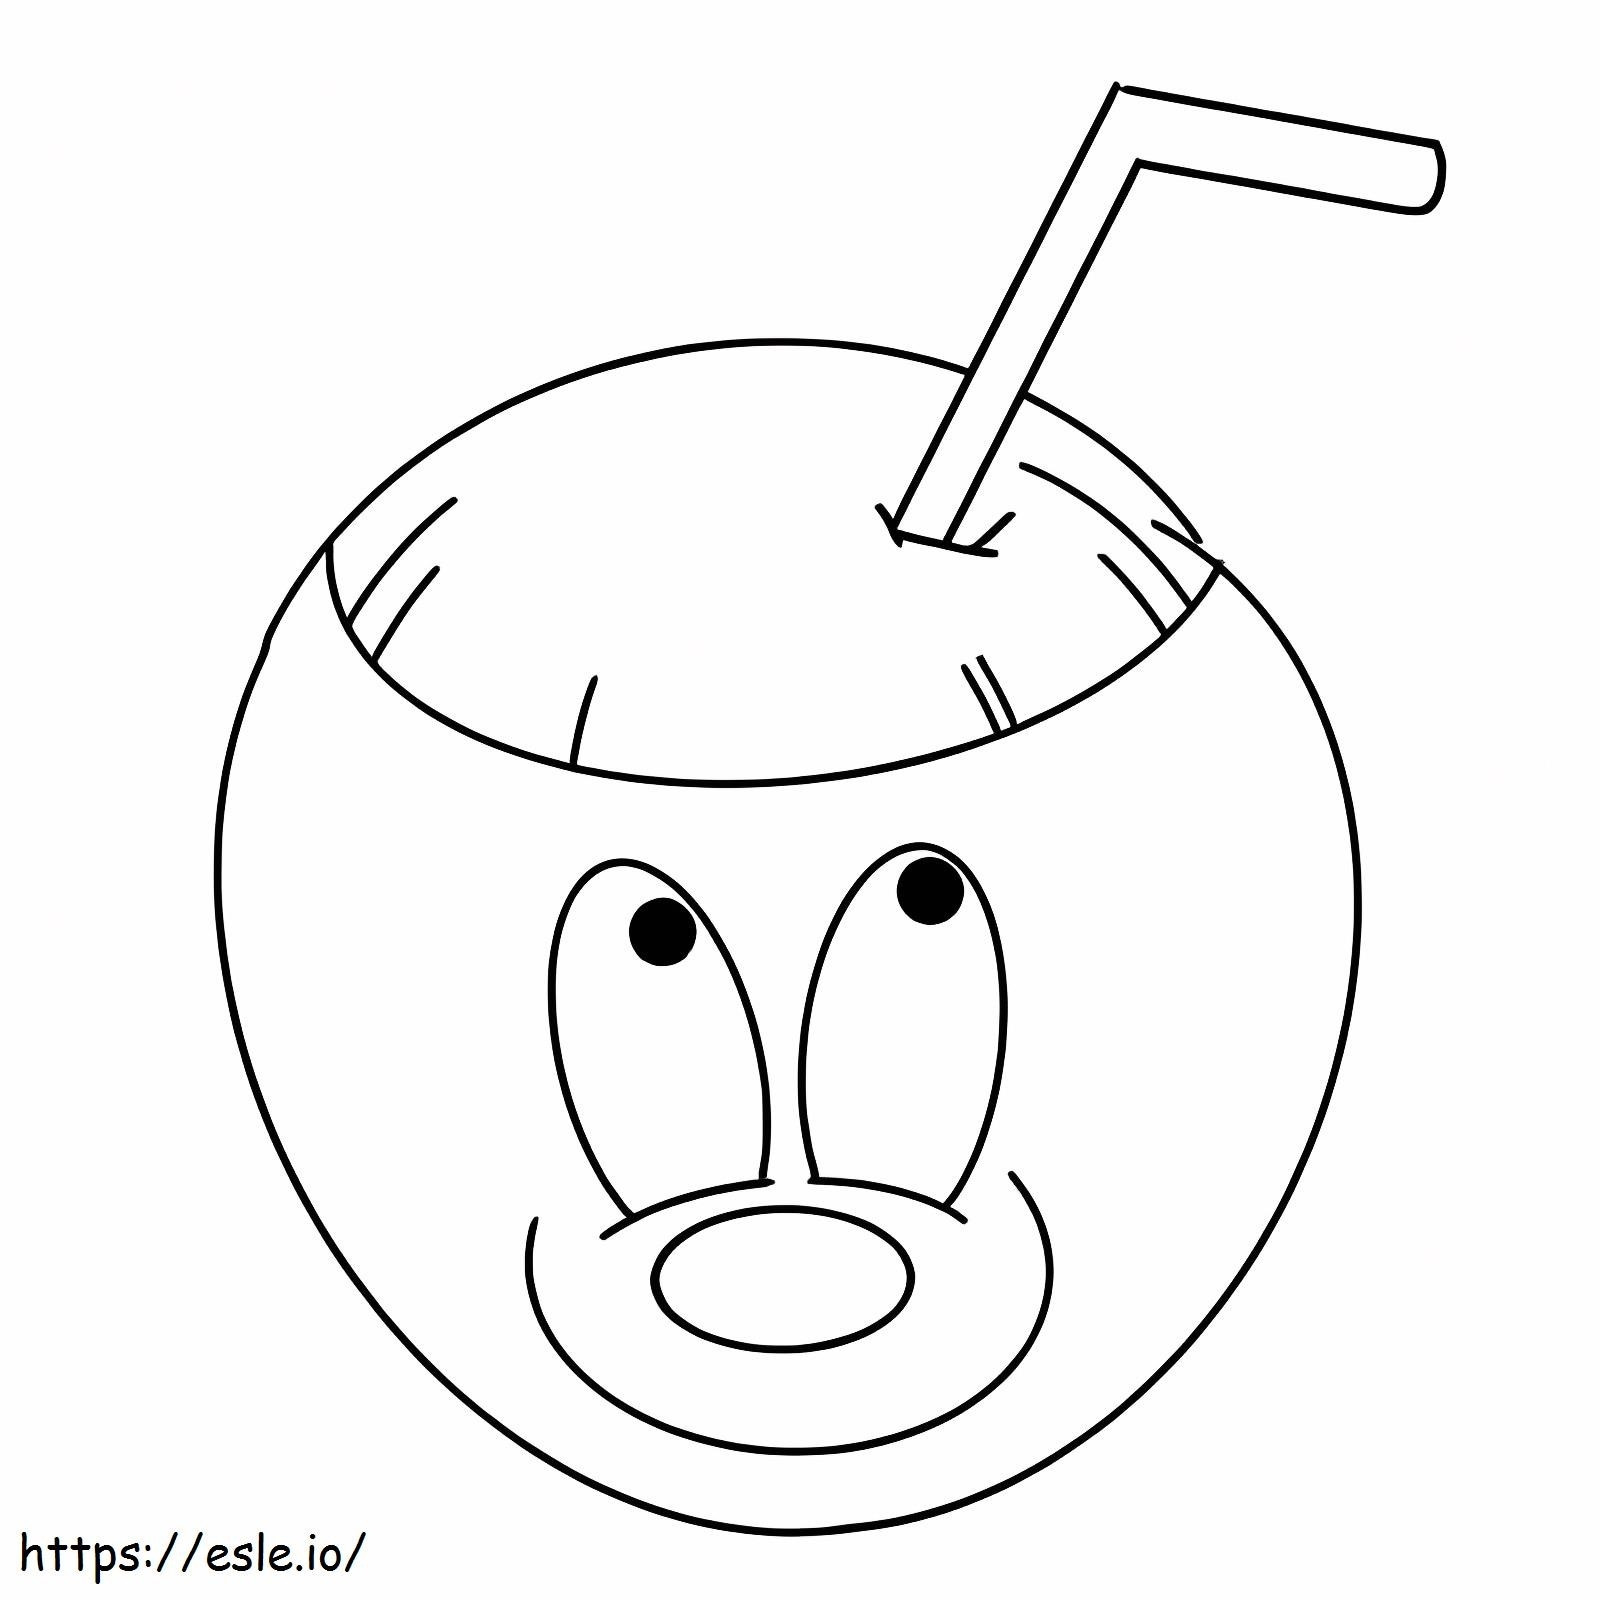 Smiling Coconut Drink coloring page